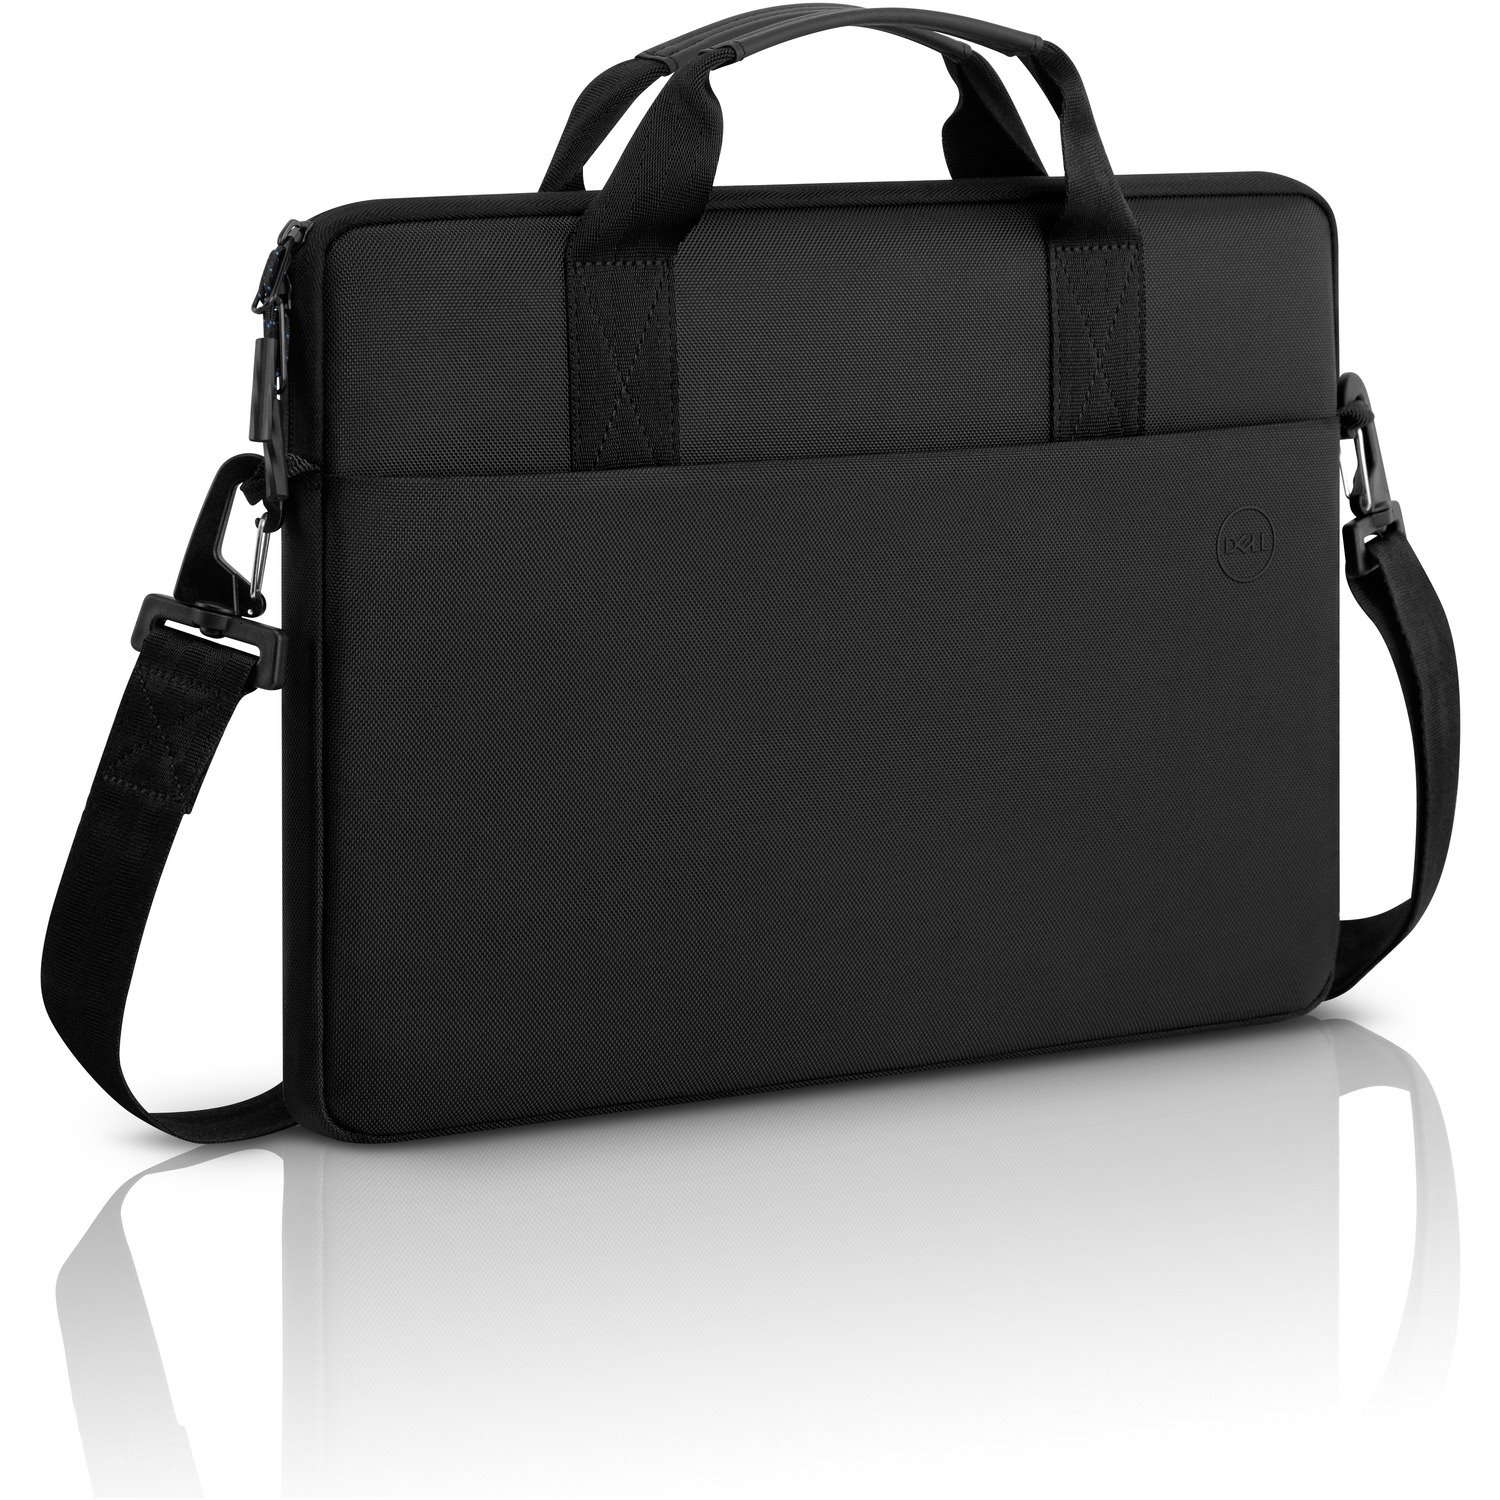 Dell EcoLoop Pro Carrying Case (Sleeve) for 27.9 cm (11") to 35.6 cm (14") Dell Notebook - Black